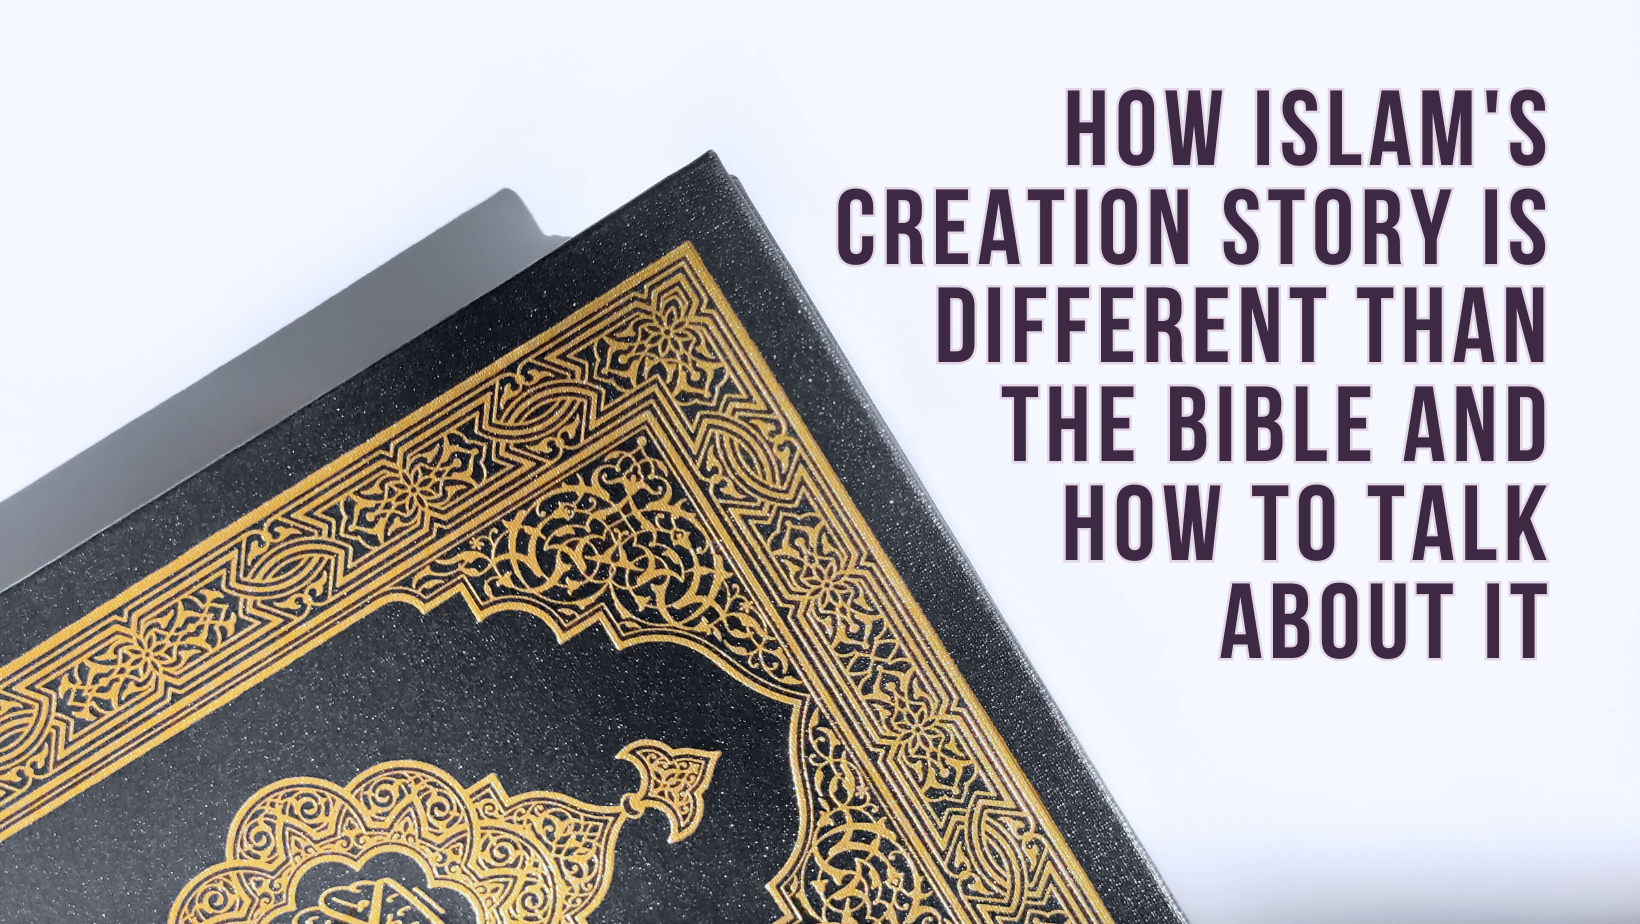 How Islam's creation story is different than the Bible and how to talk about it